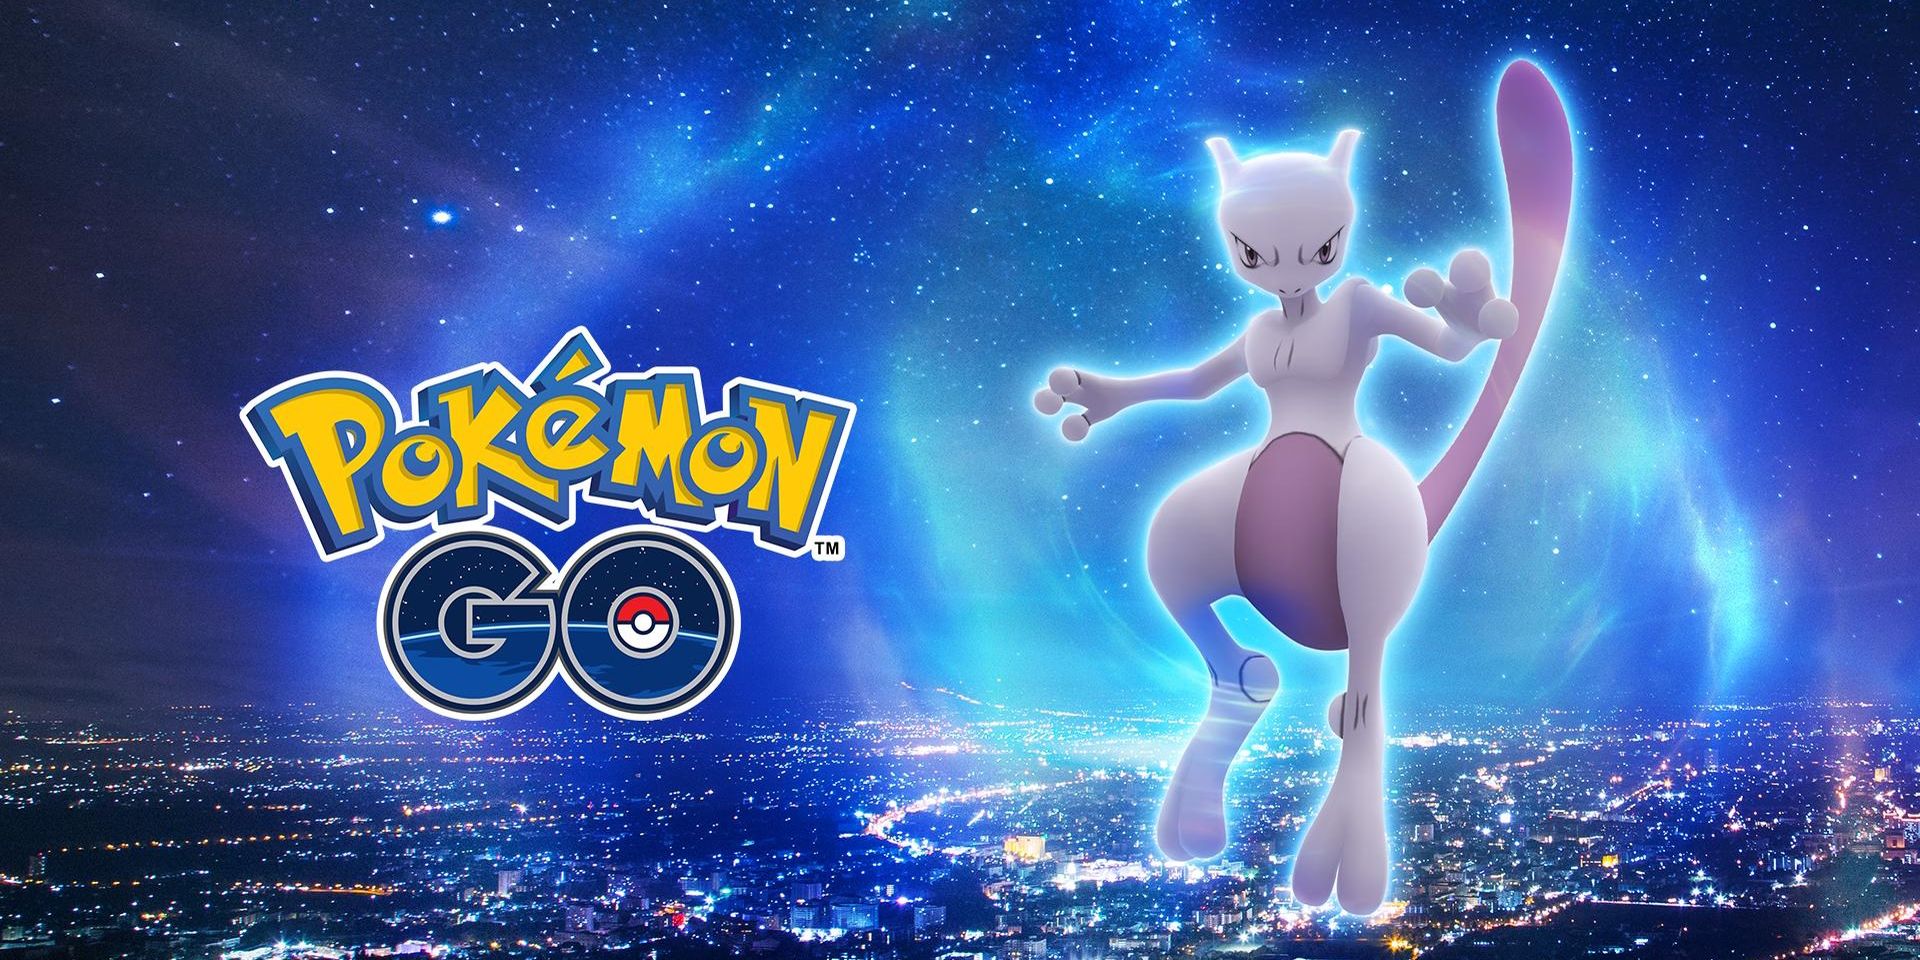 Image of Shadow Mewtwo in the sky next to the Pokemon Go logo